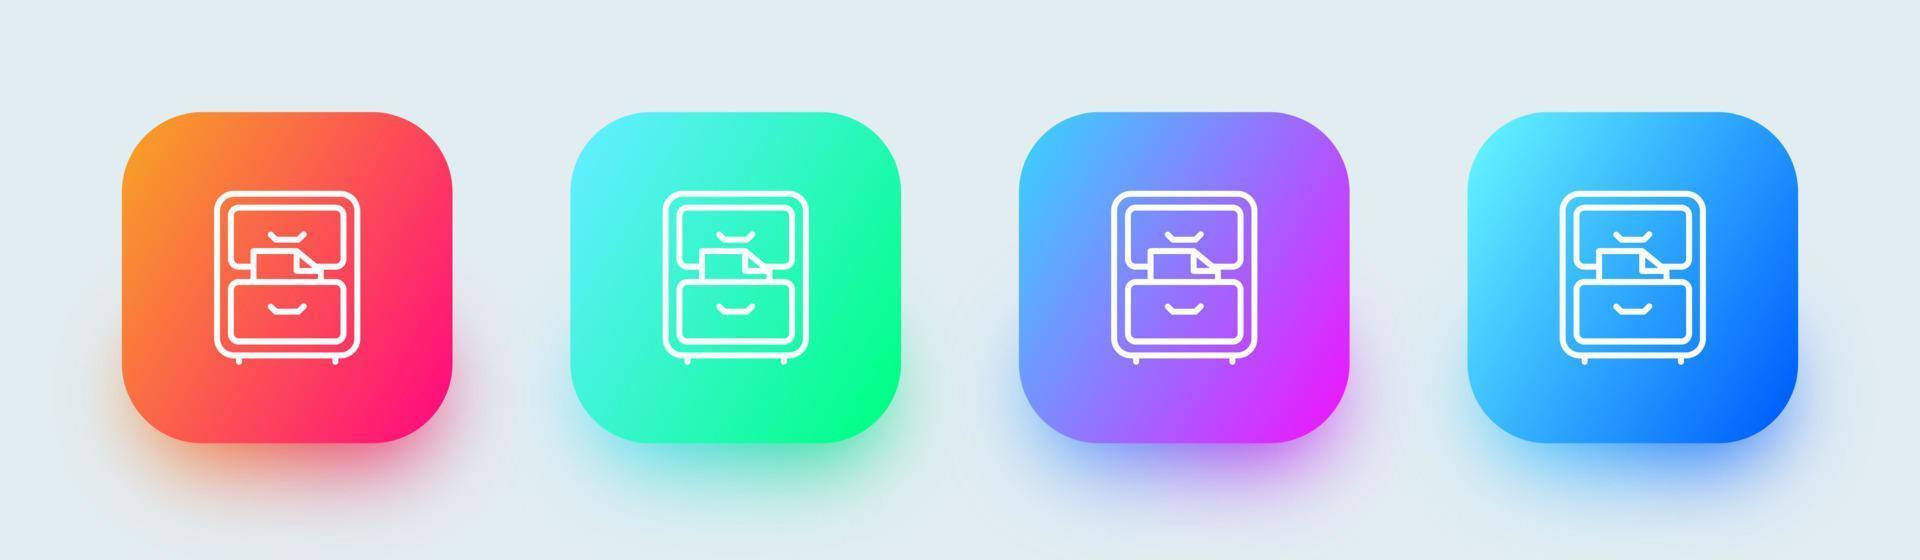 File cabinet line icon in square gradient colors. Archive signs vector illustration.